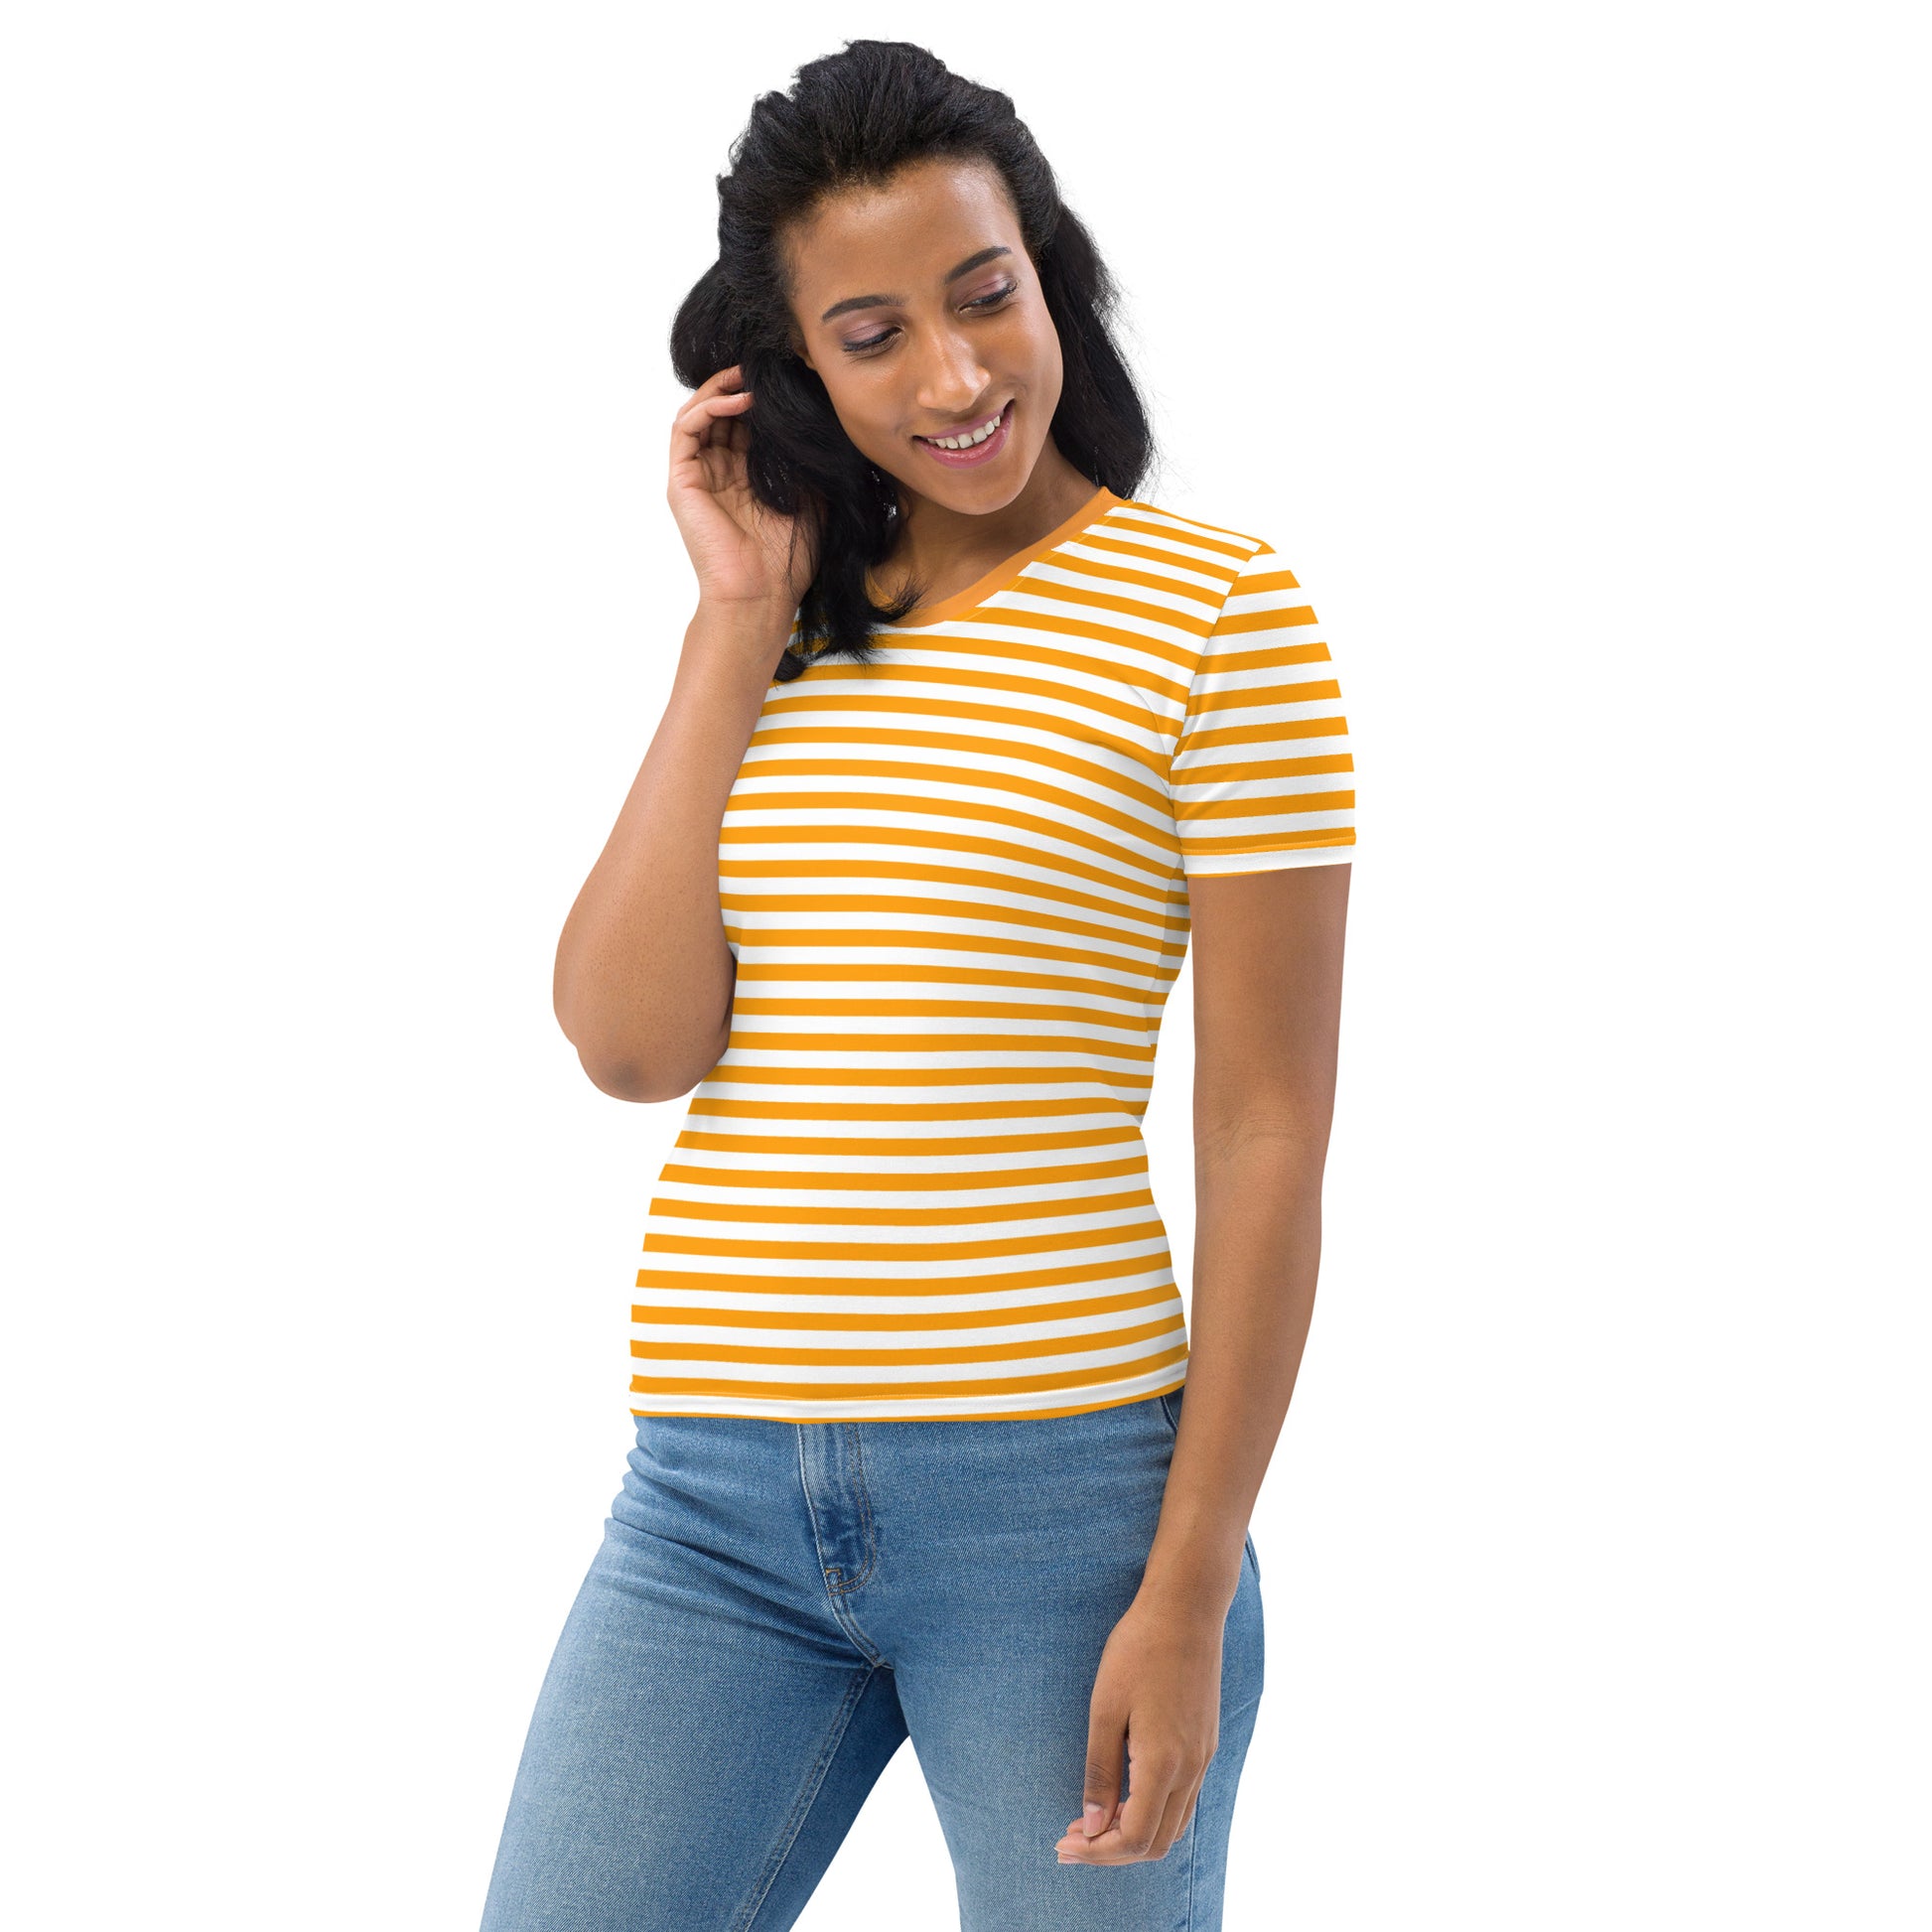 Orange and white striped t-shirt that will make you feel confident and stylish